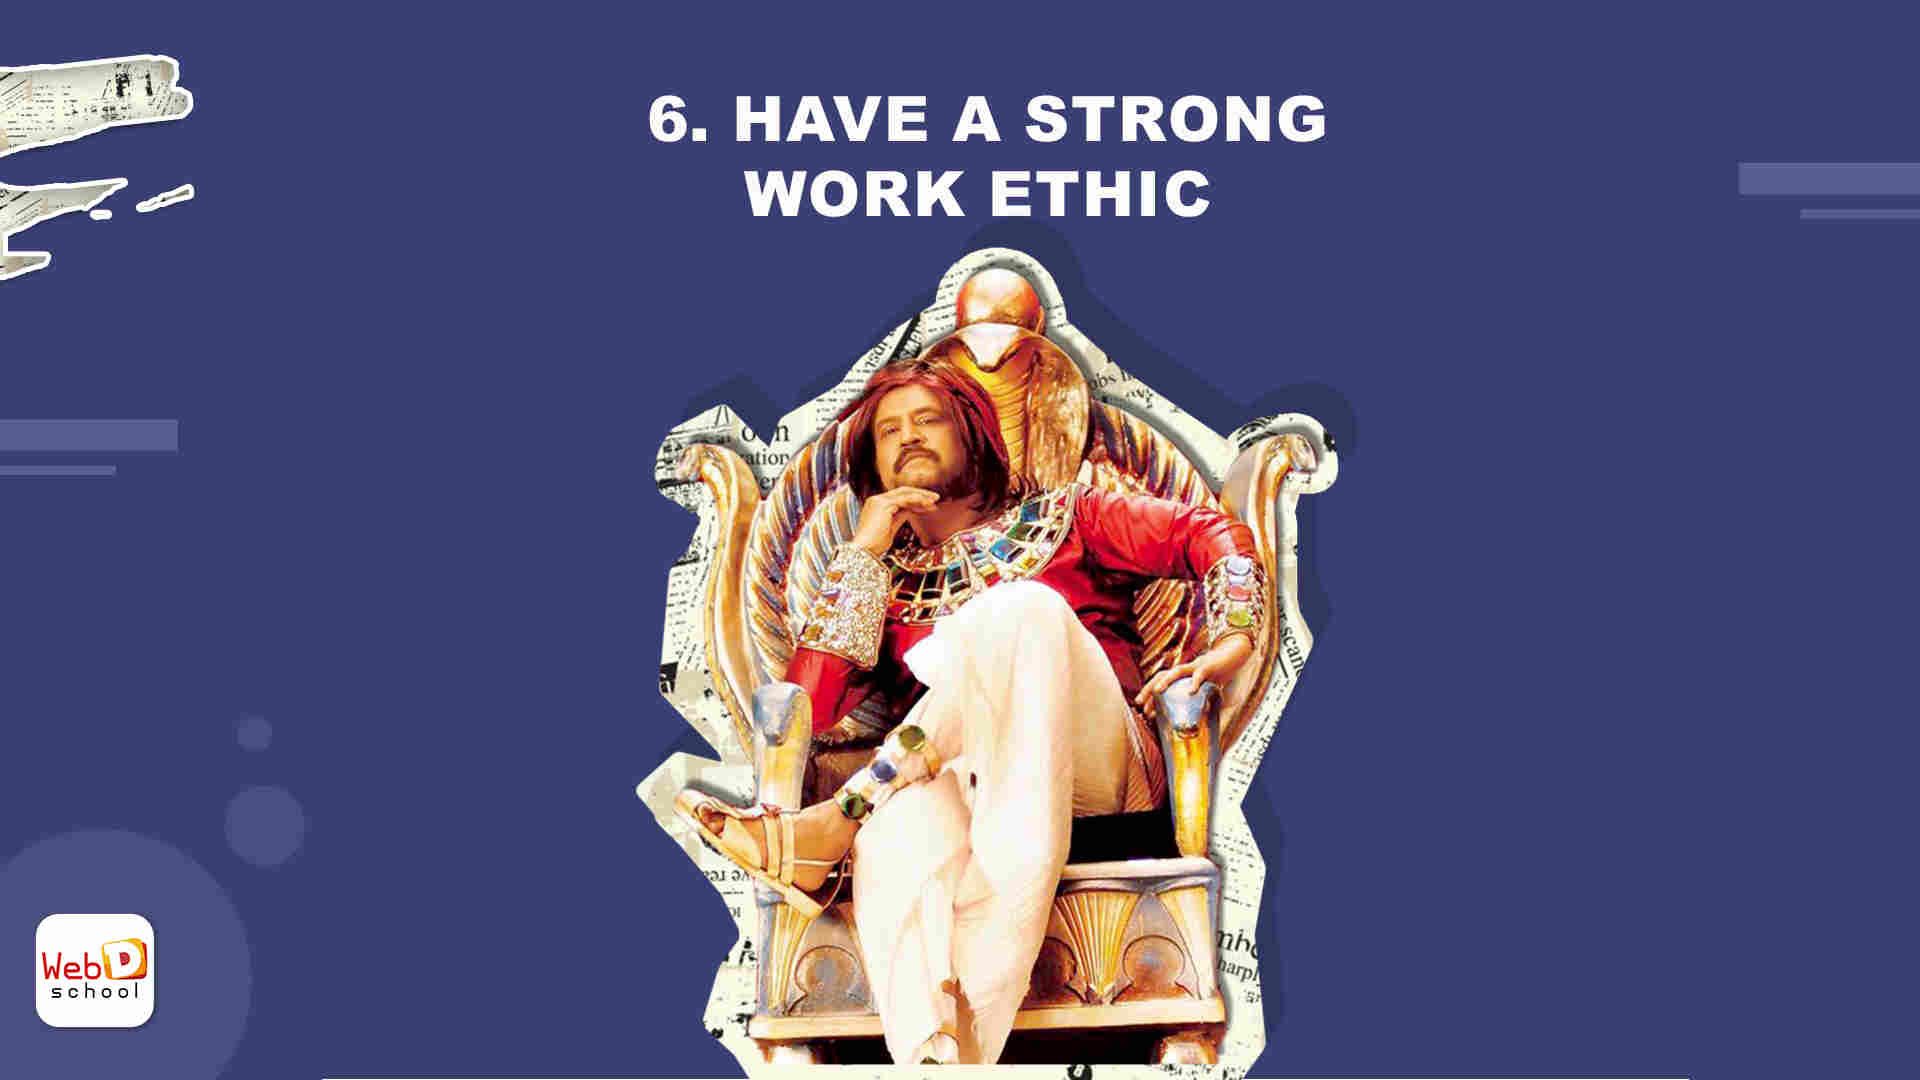 Have a strong work ethic